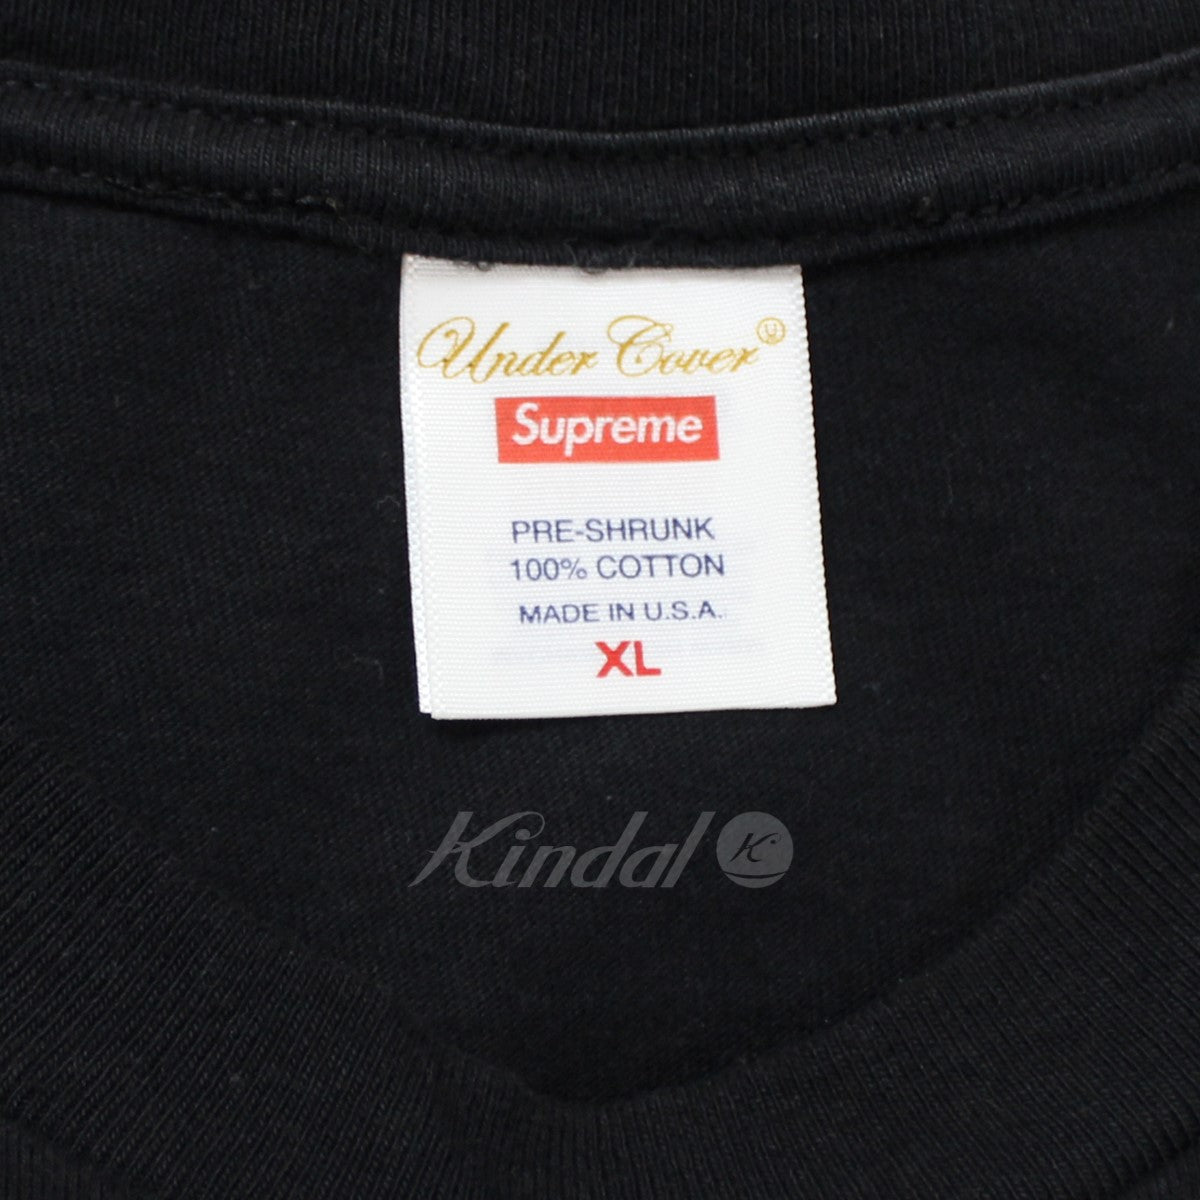 Supreme × UNDER COVER 23SS Undercover Tag Tee アンダー カバー タグ ...